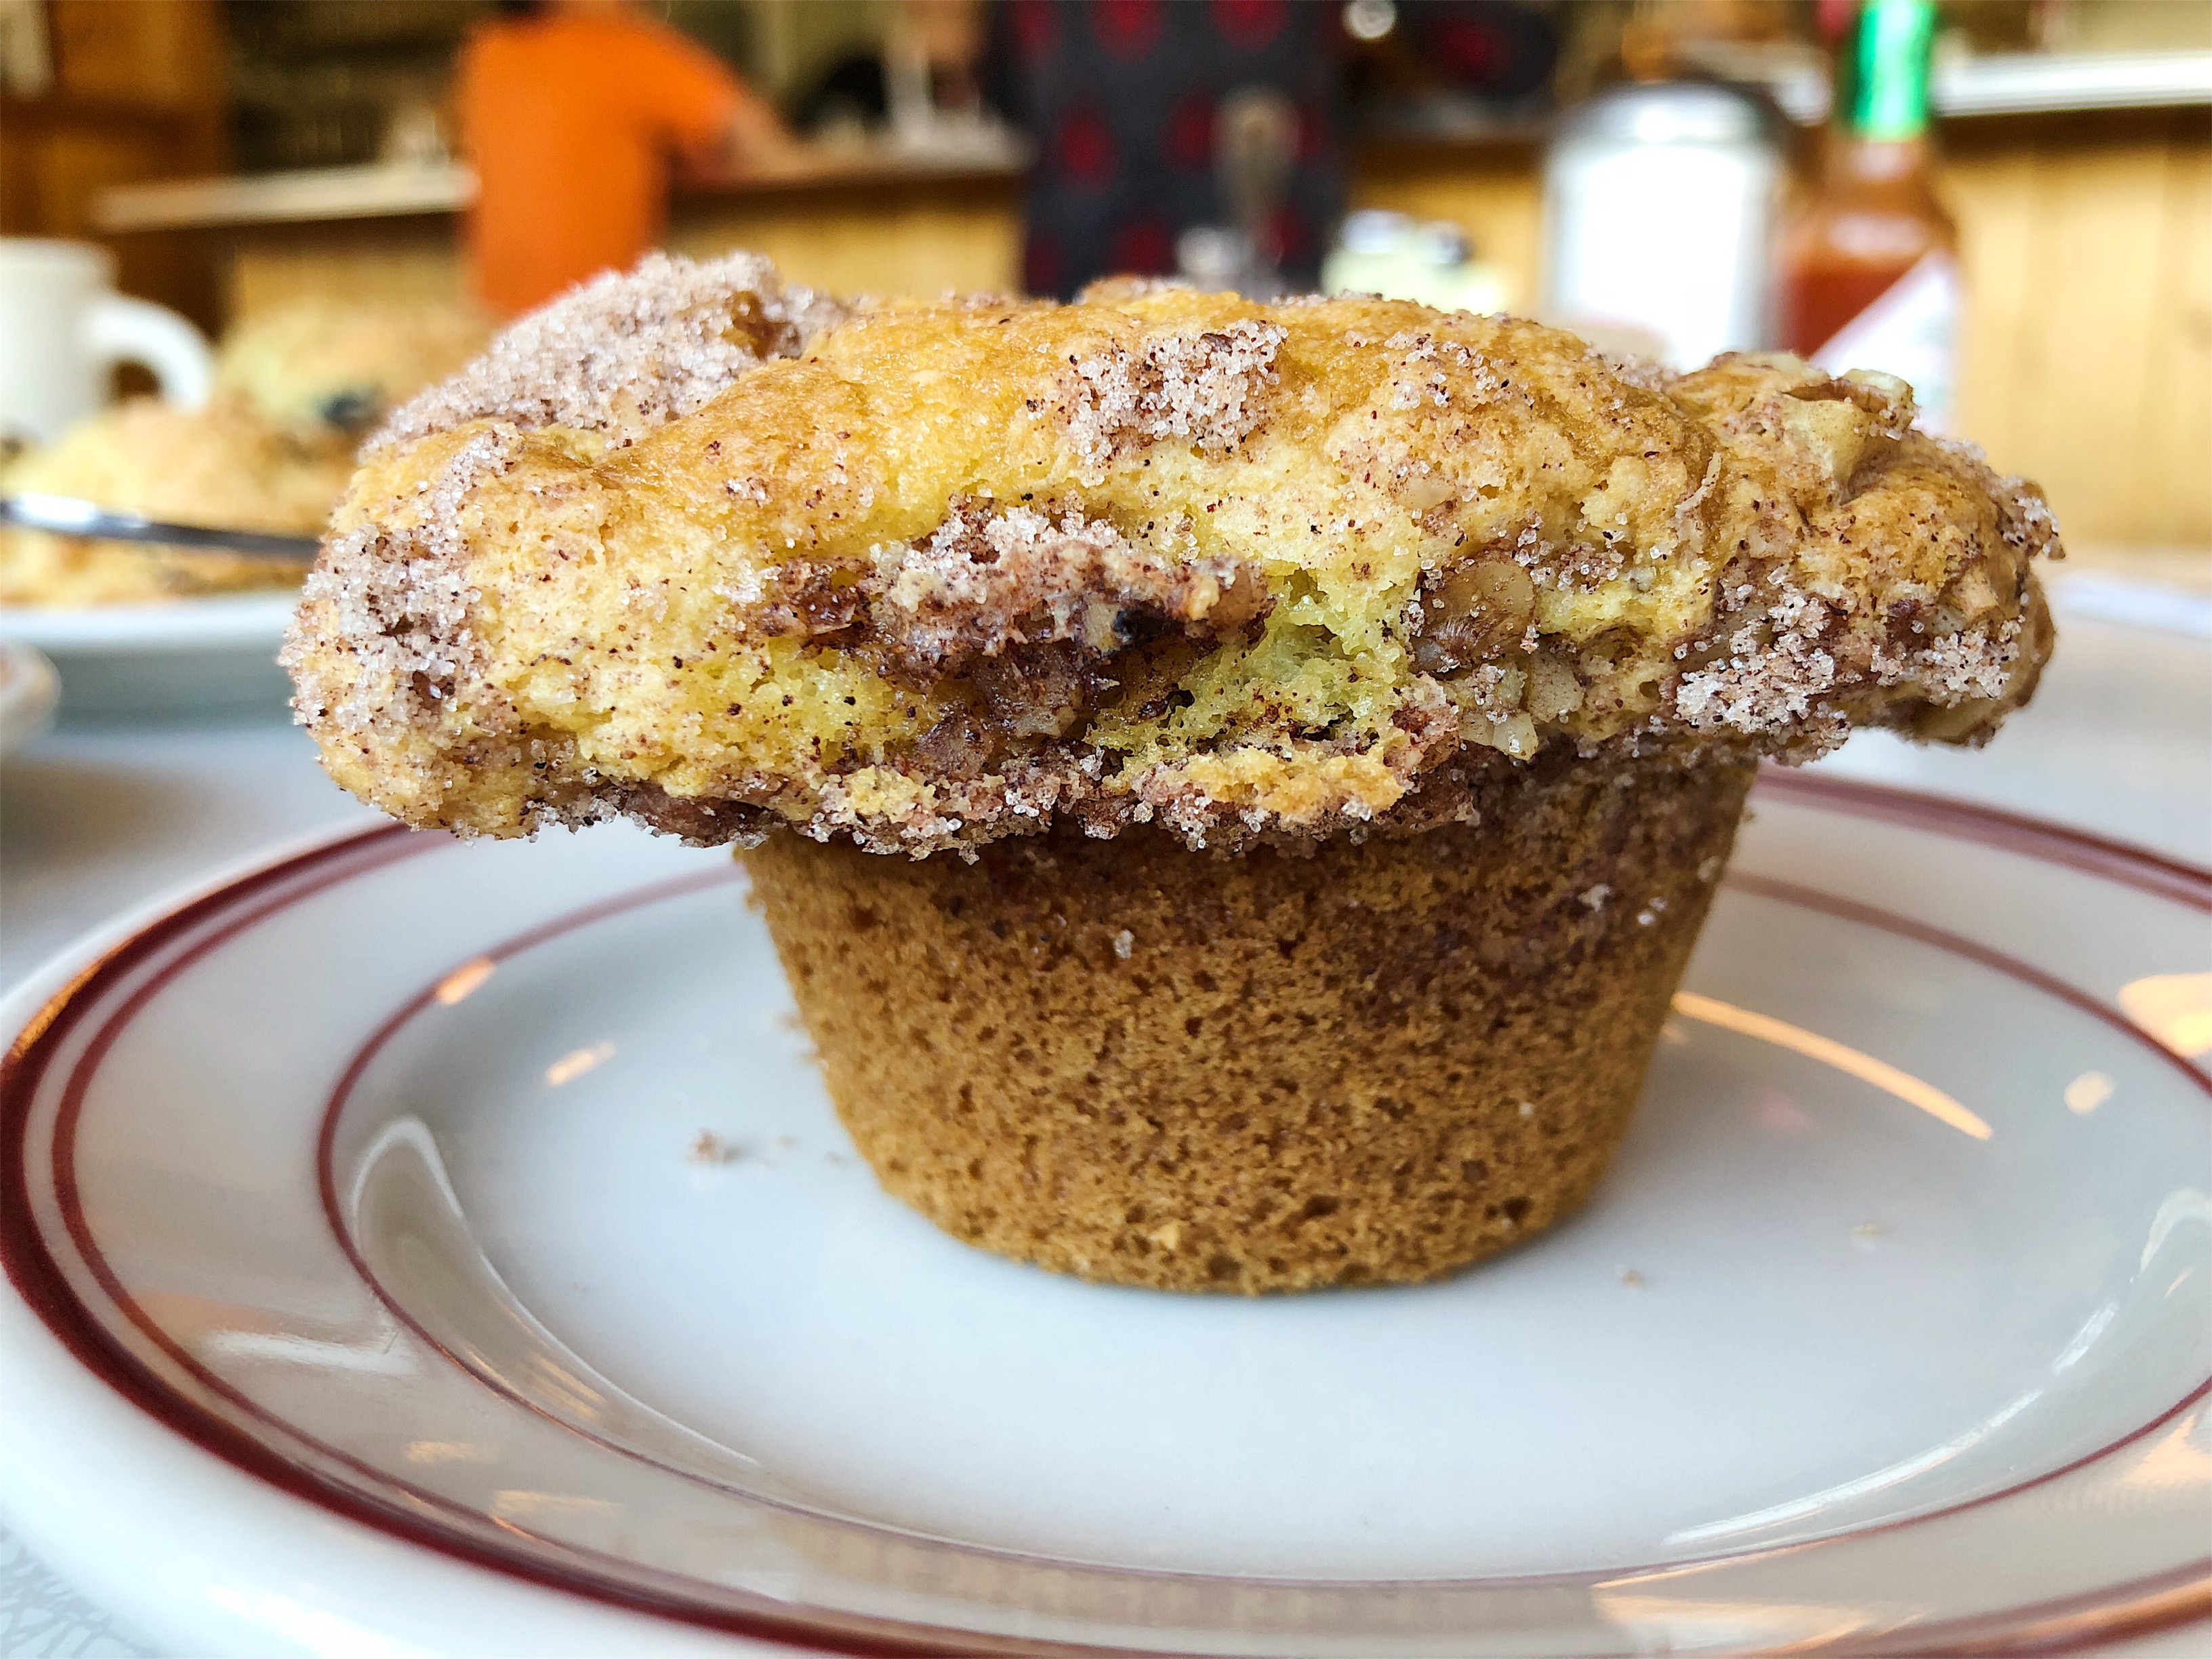 Broad-topped muffin is veined with streaks of cinnamon sugar